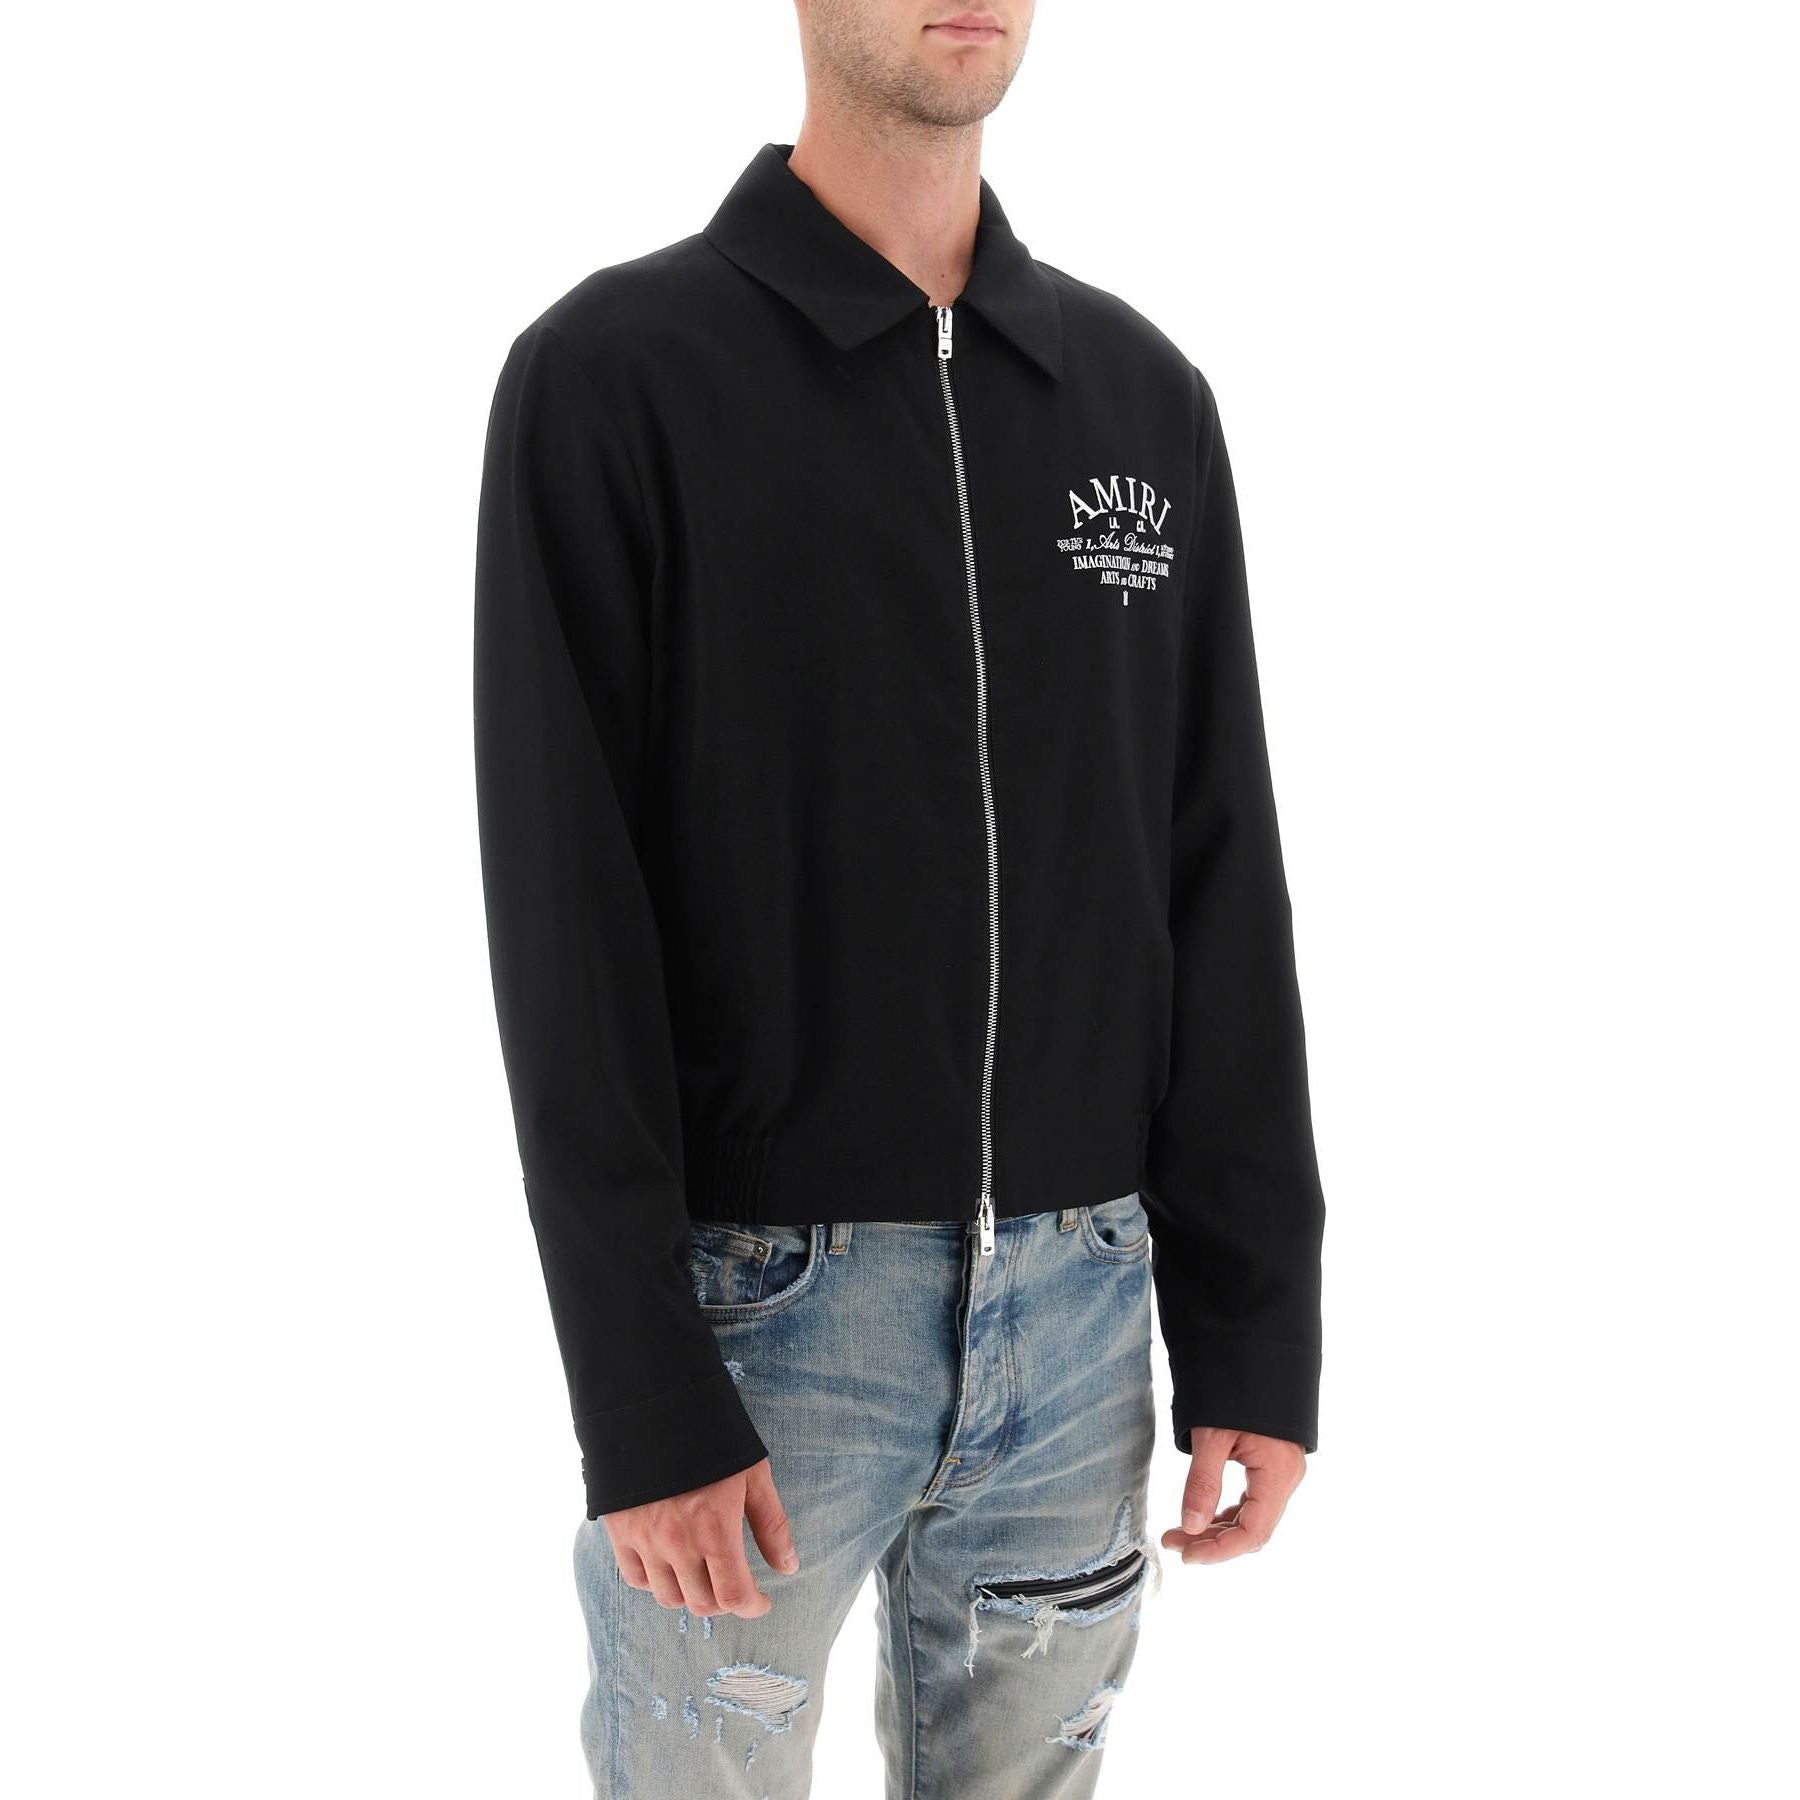 Wool Blend Blouson Jacket with Arts District Embroidery